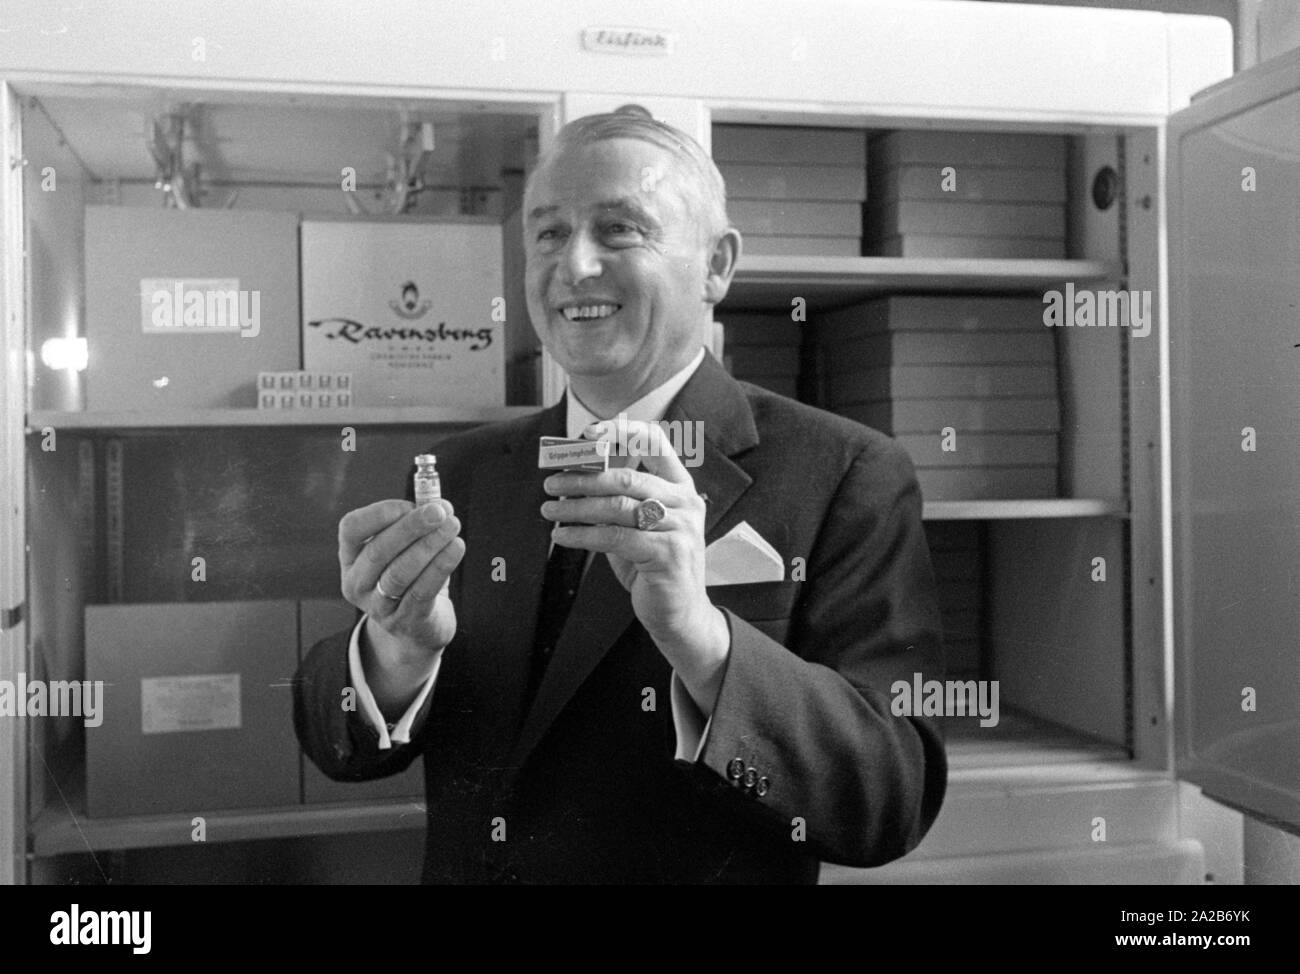 Immunization action in Konstanz with a newly developed flu vaccine of the Ravensberg Chemische Fabrik, an employee of the factory presents the vaccine. Around 1960 committees recommended the vaccination against influenza viruses for the first time in the Federal Republic of Germany. Stock Photo